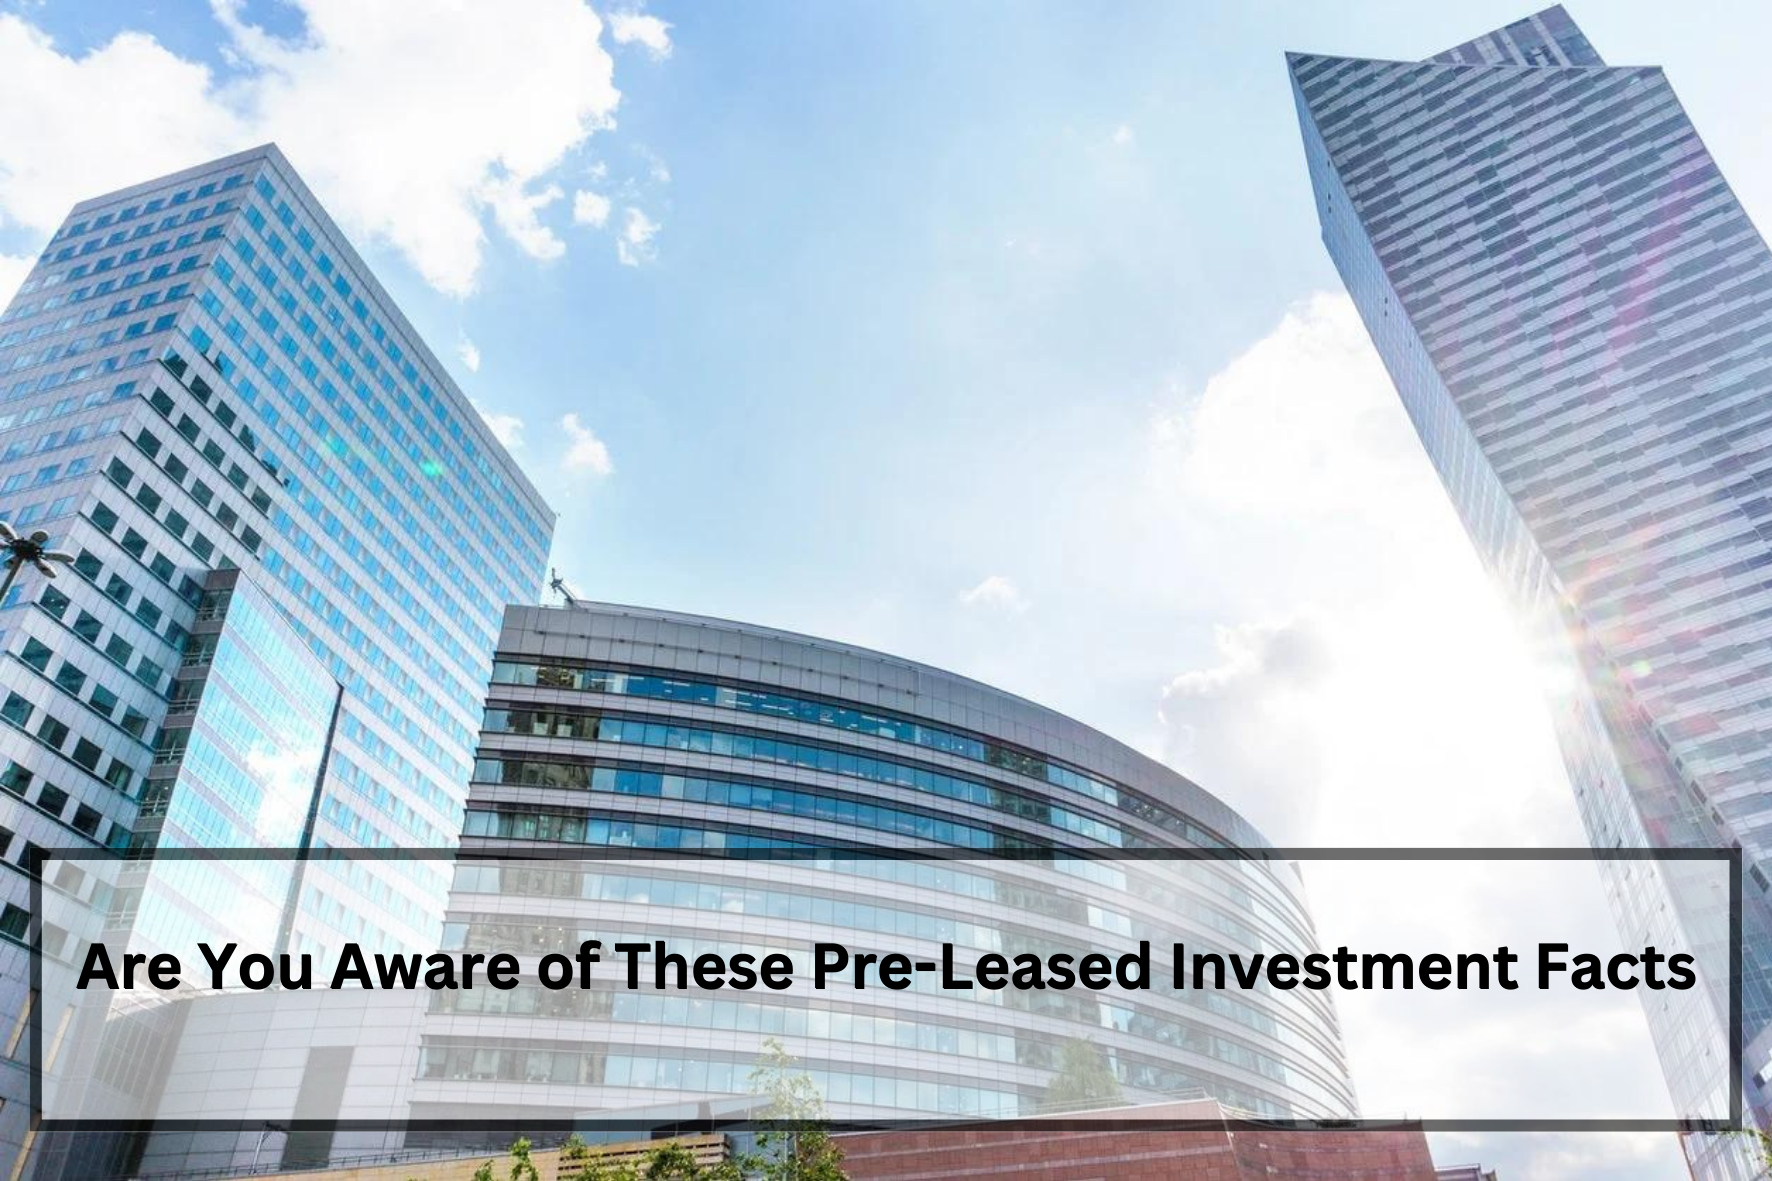 uploads/blog/Are_You_Aware_of_These_Pre-Leased_Investment_Facts.png